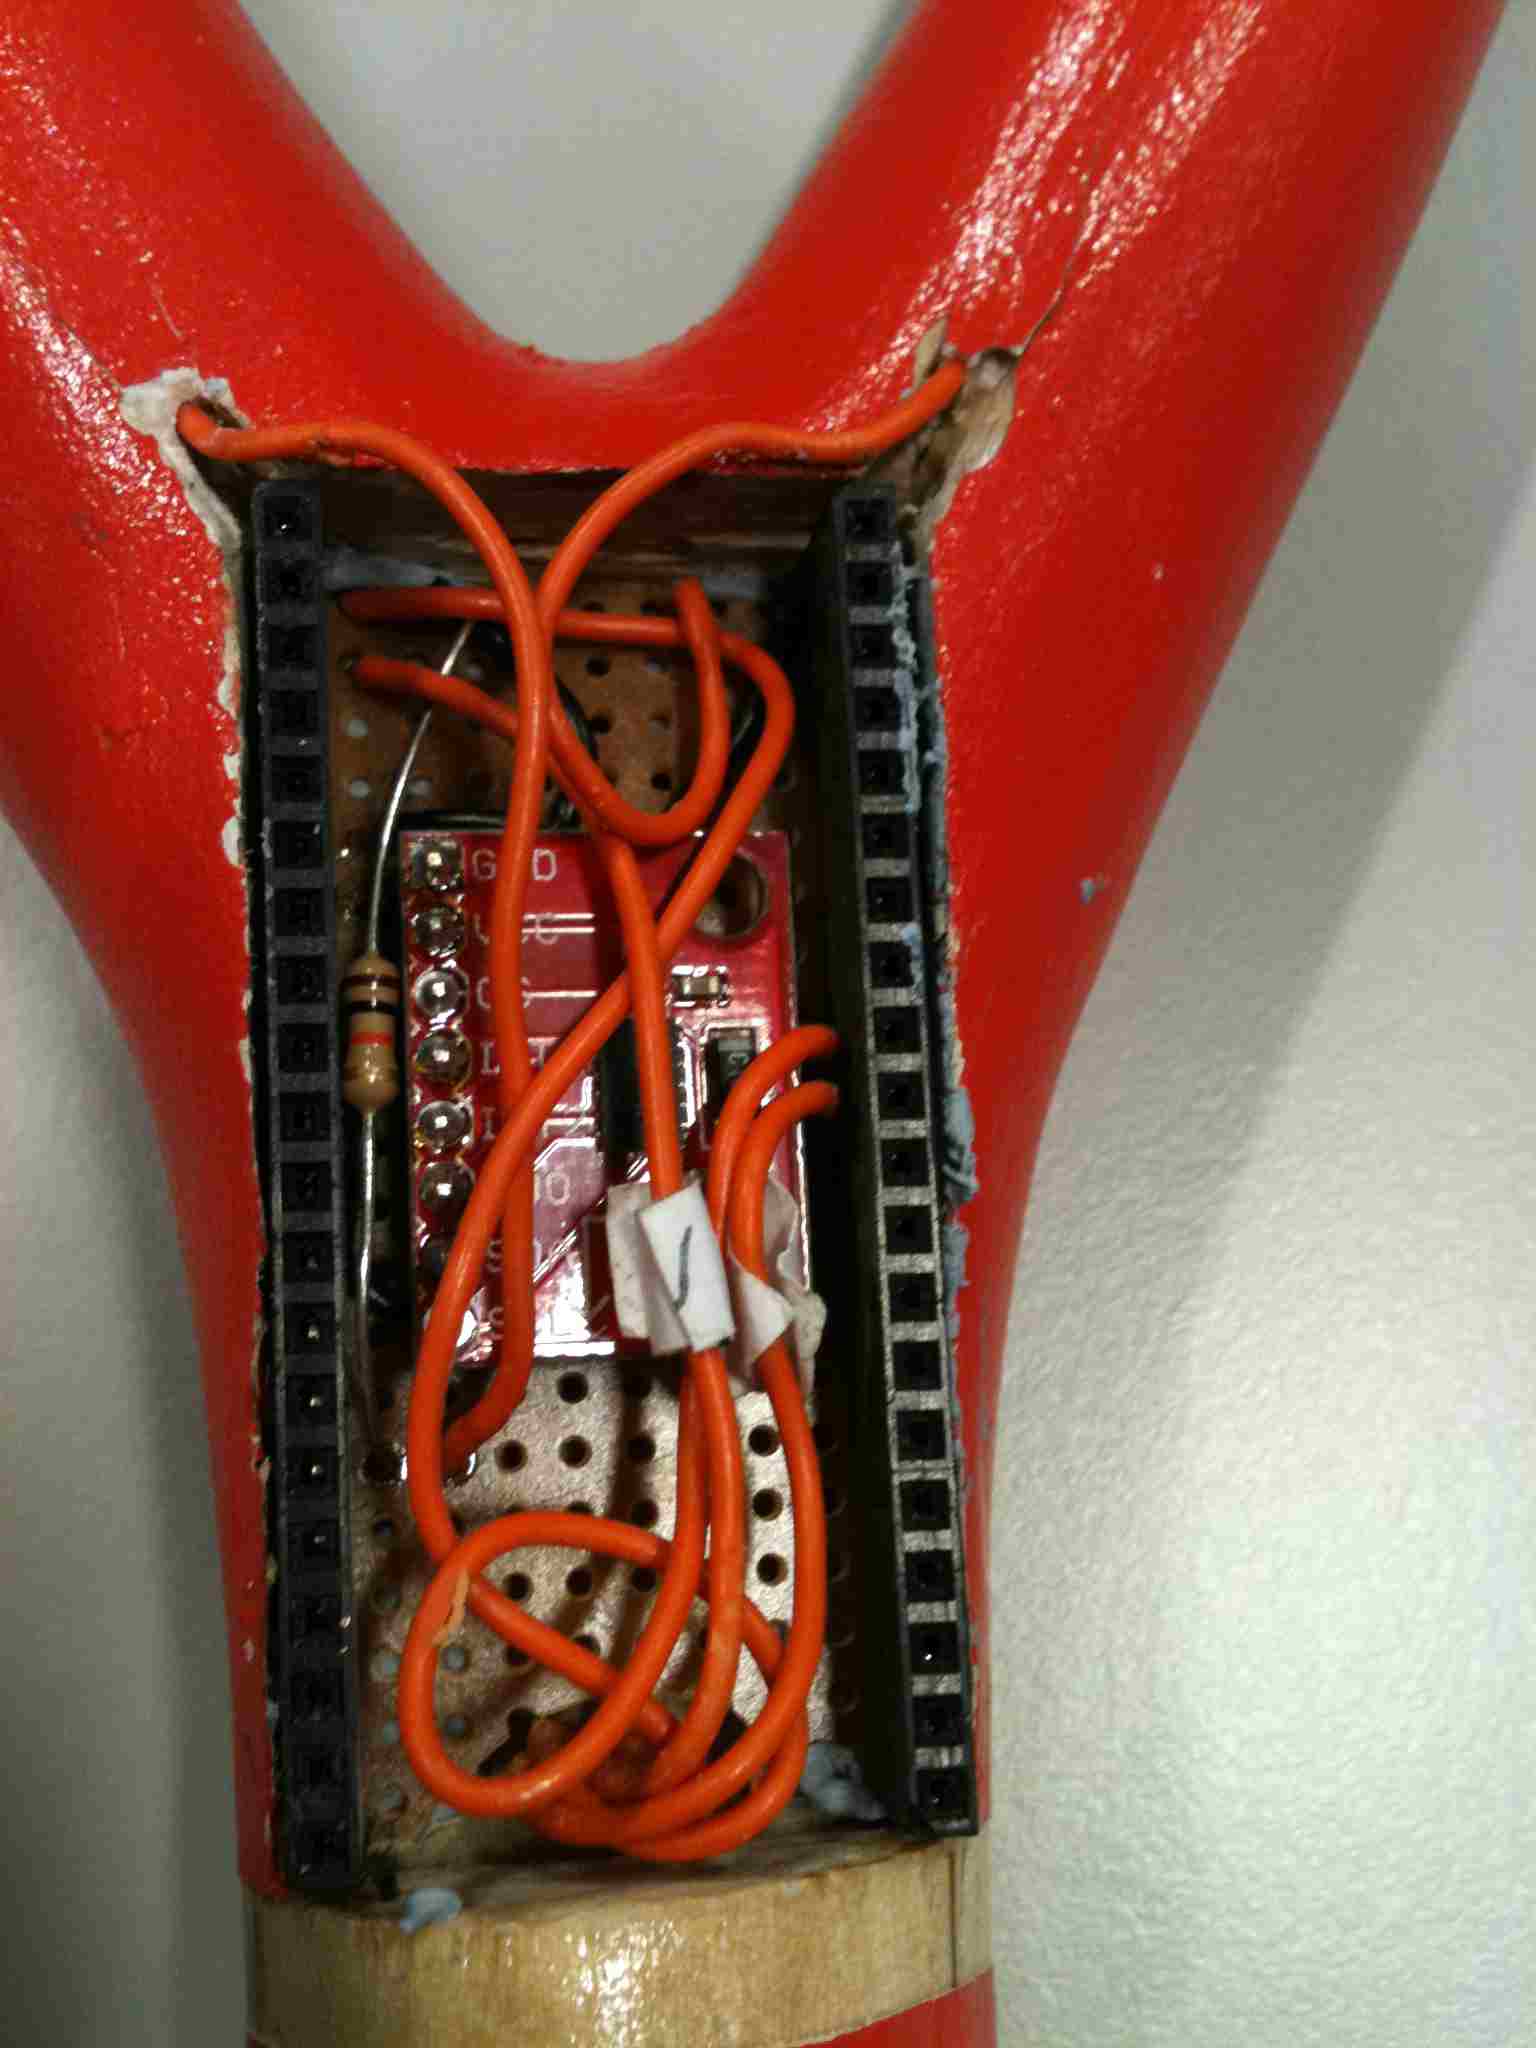 Inside the slingshot with the accelerometer